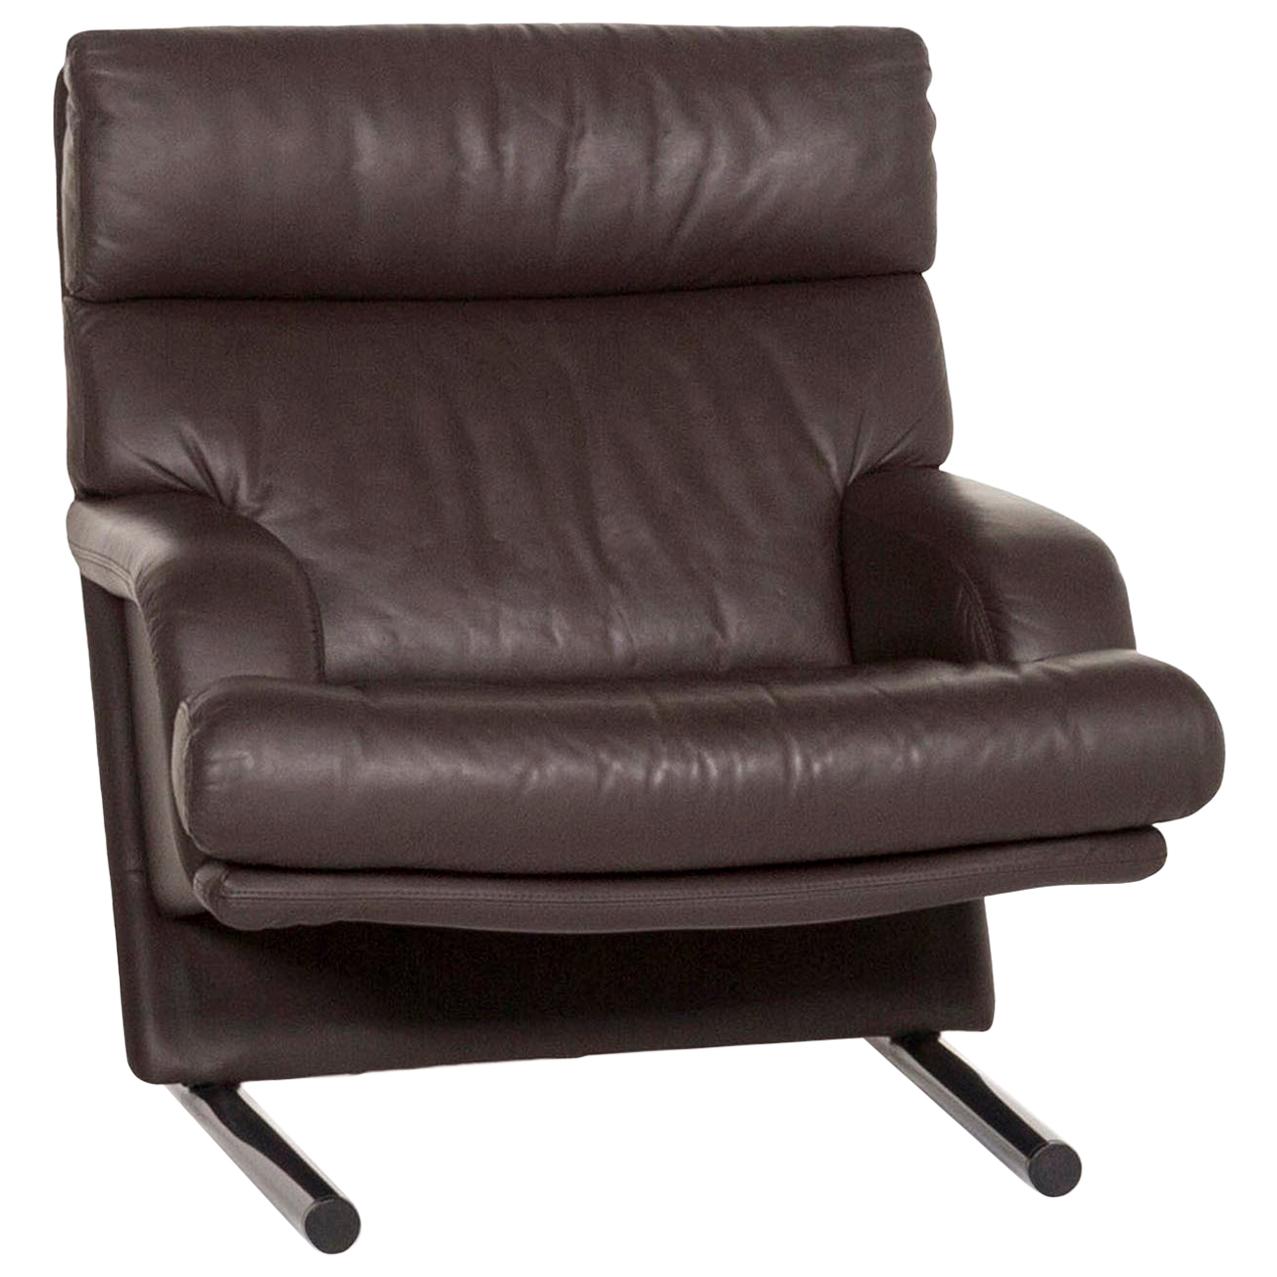 Rolf Benz Leather Armchair Brown Dark Brown Club Armchair For Sale